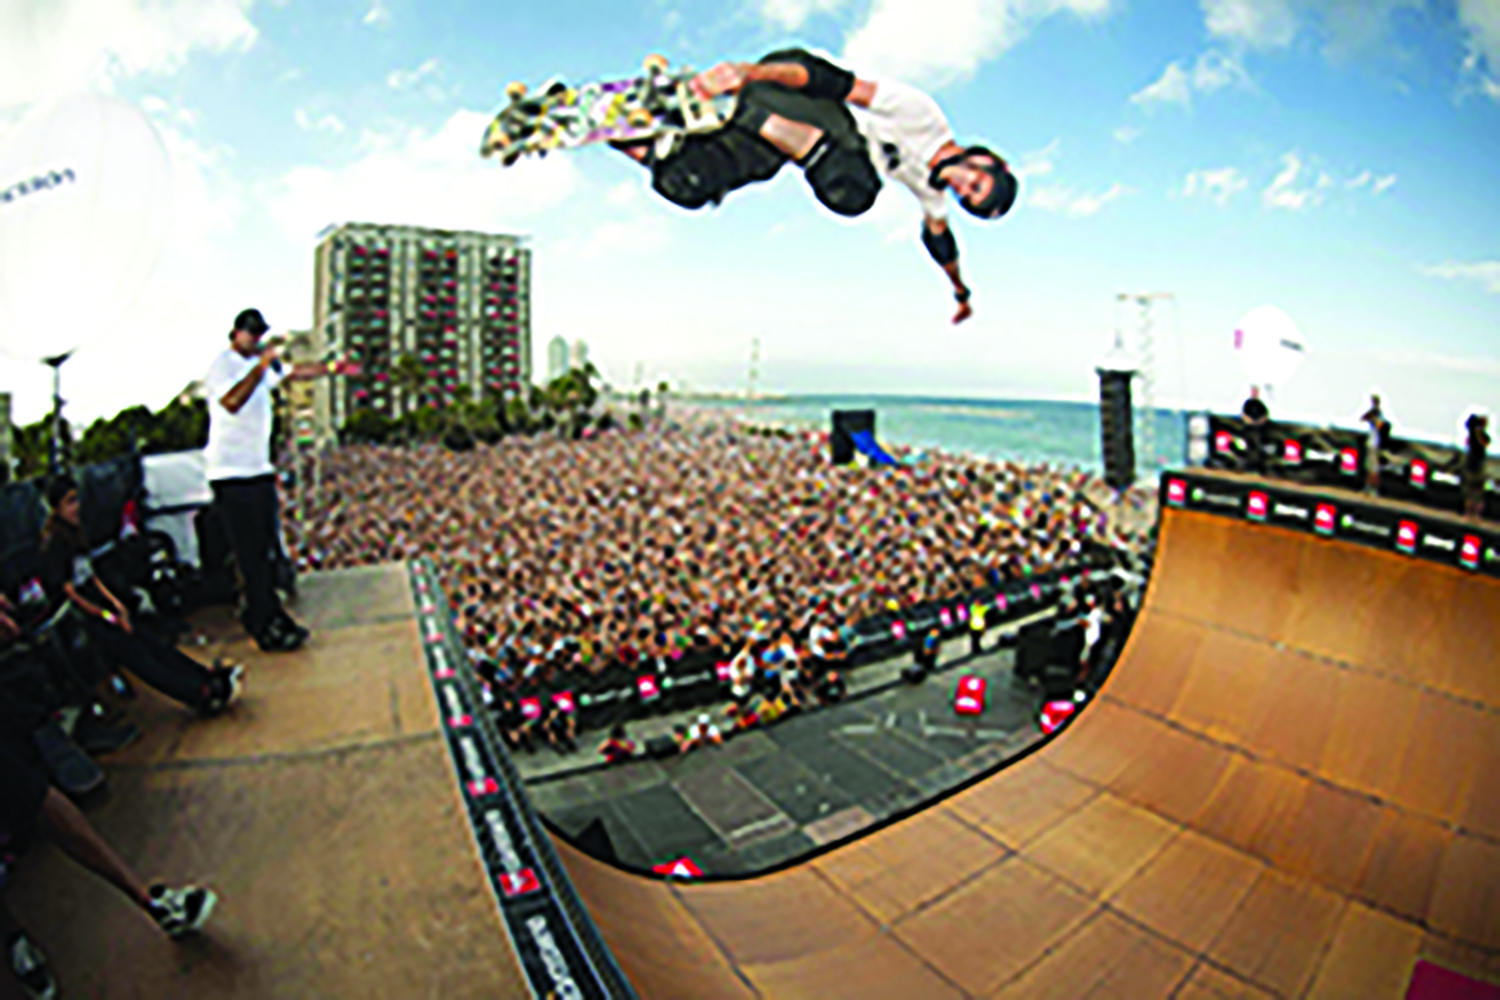 Here’s a picture of skateboard millionaire Tony Hawk risking death for the edification of what looks to be a couple thousand people in the audience on a beach in Southern California. He likes Niagara Falls, because the yokels who run the city government here are even stupider than their counterparts in Beaver Dam, Wisconsin! They bought his skatepark pitch hook, line and sinker, and now he is considering introducing Niagara Falls Mayor Paul Dyster to the wonders of the Hula Hoop.